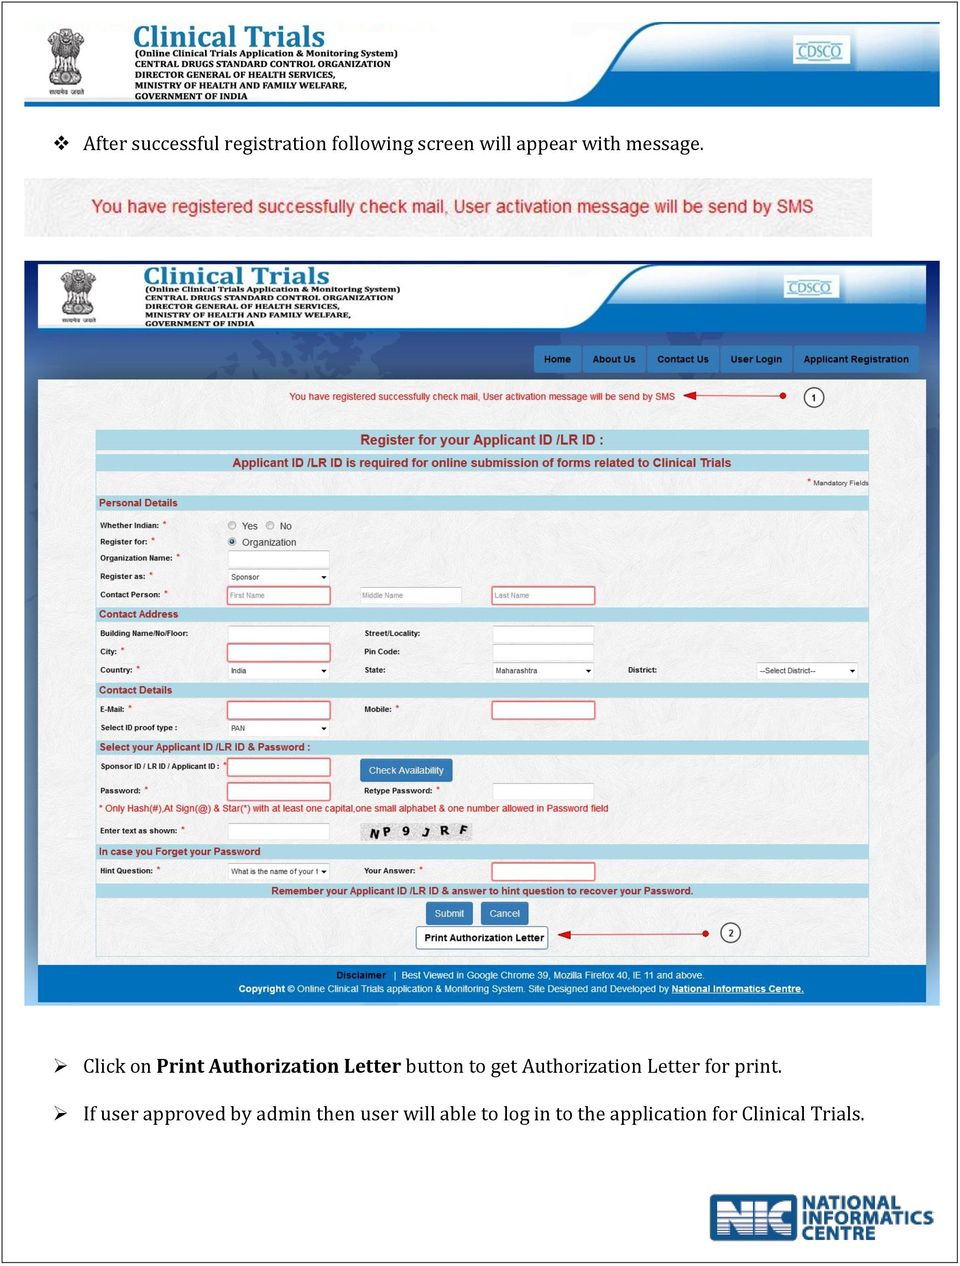 Click on Print Authorization Letter button to get